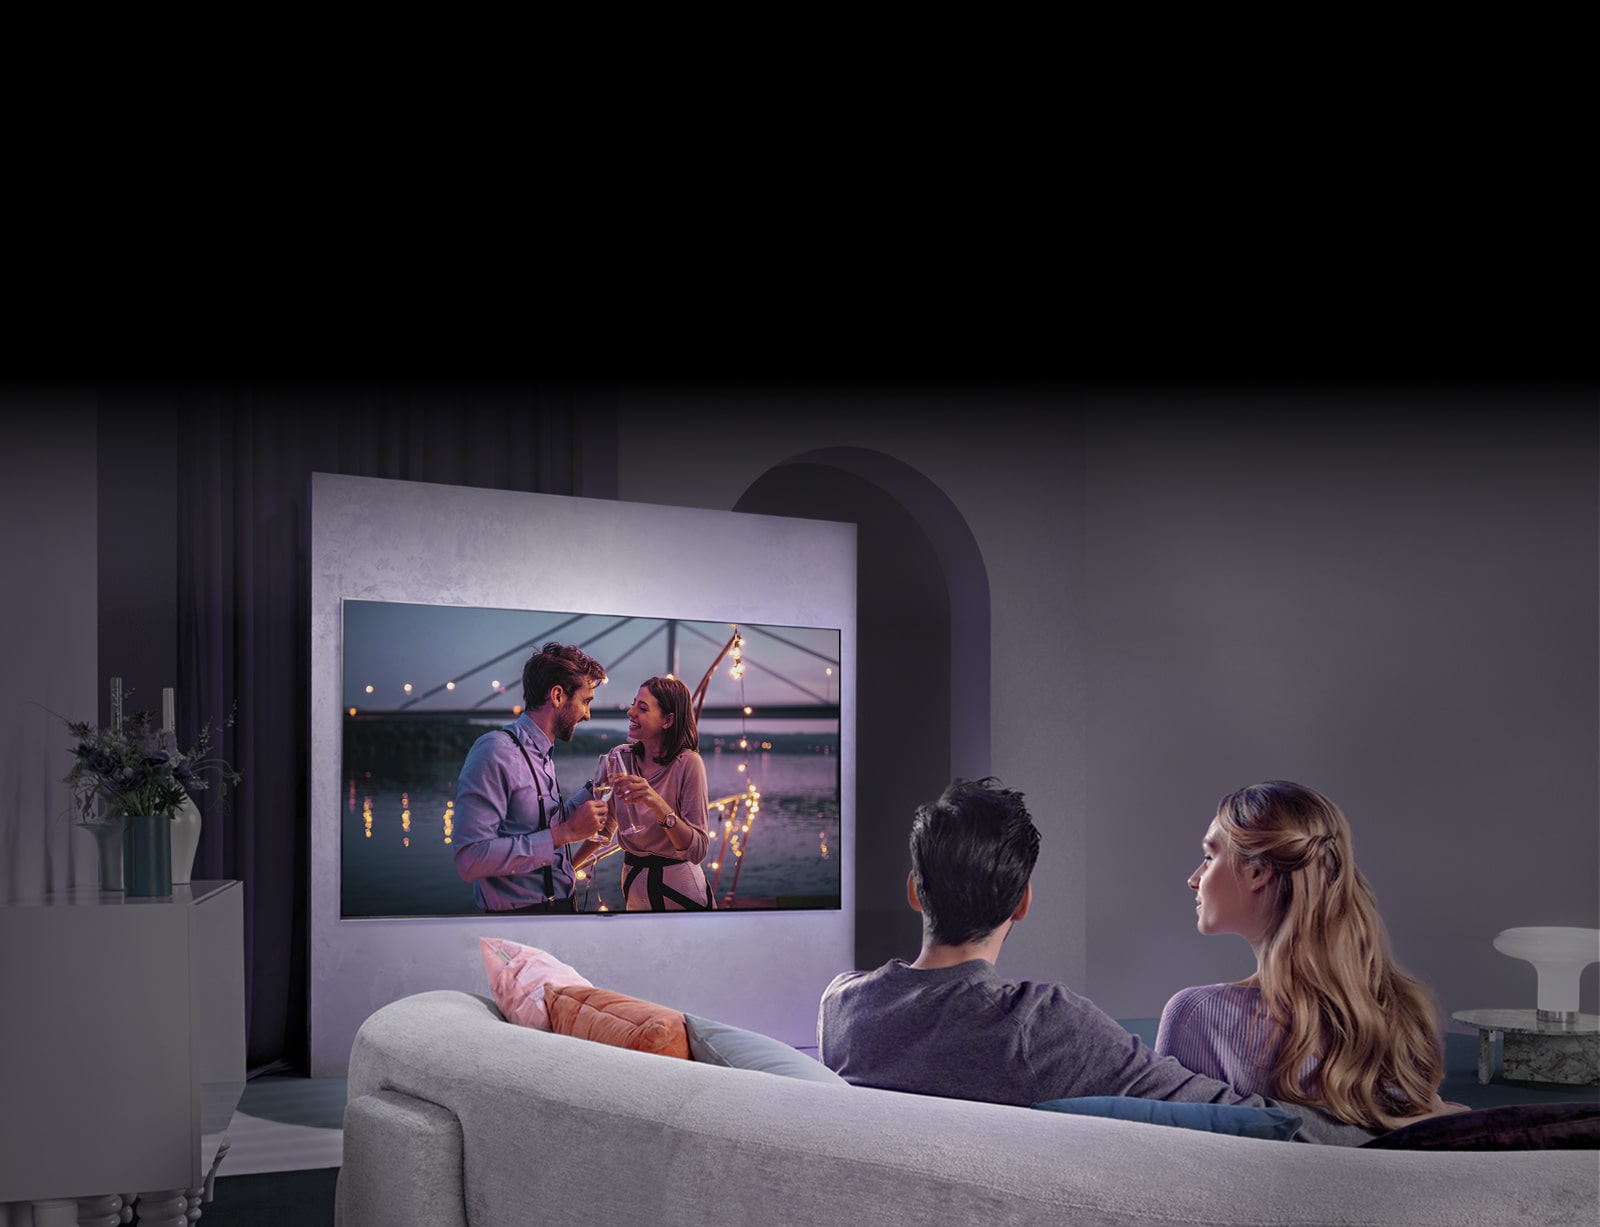 A person sitting on a sofa is enjoying a movie on a big TV on the wall.